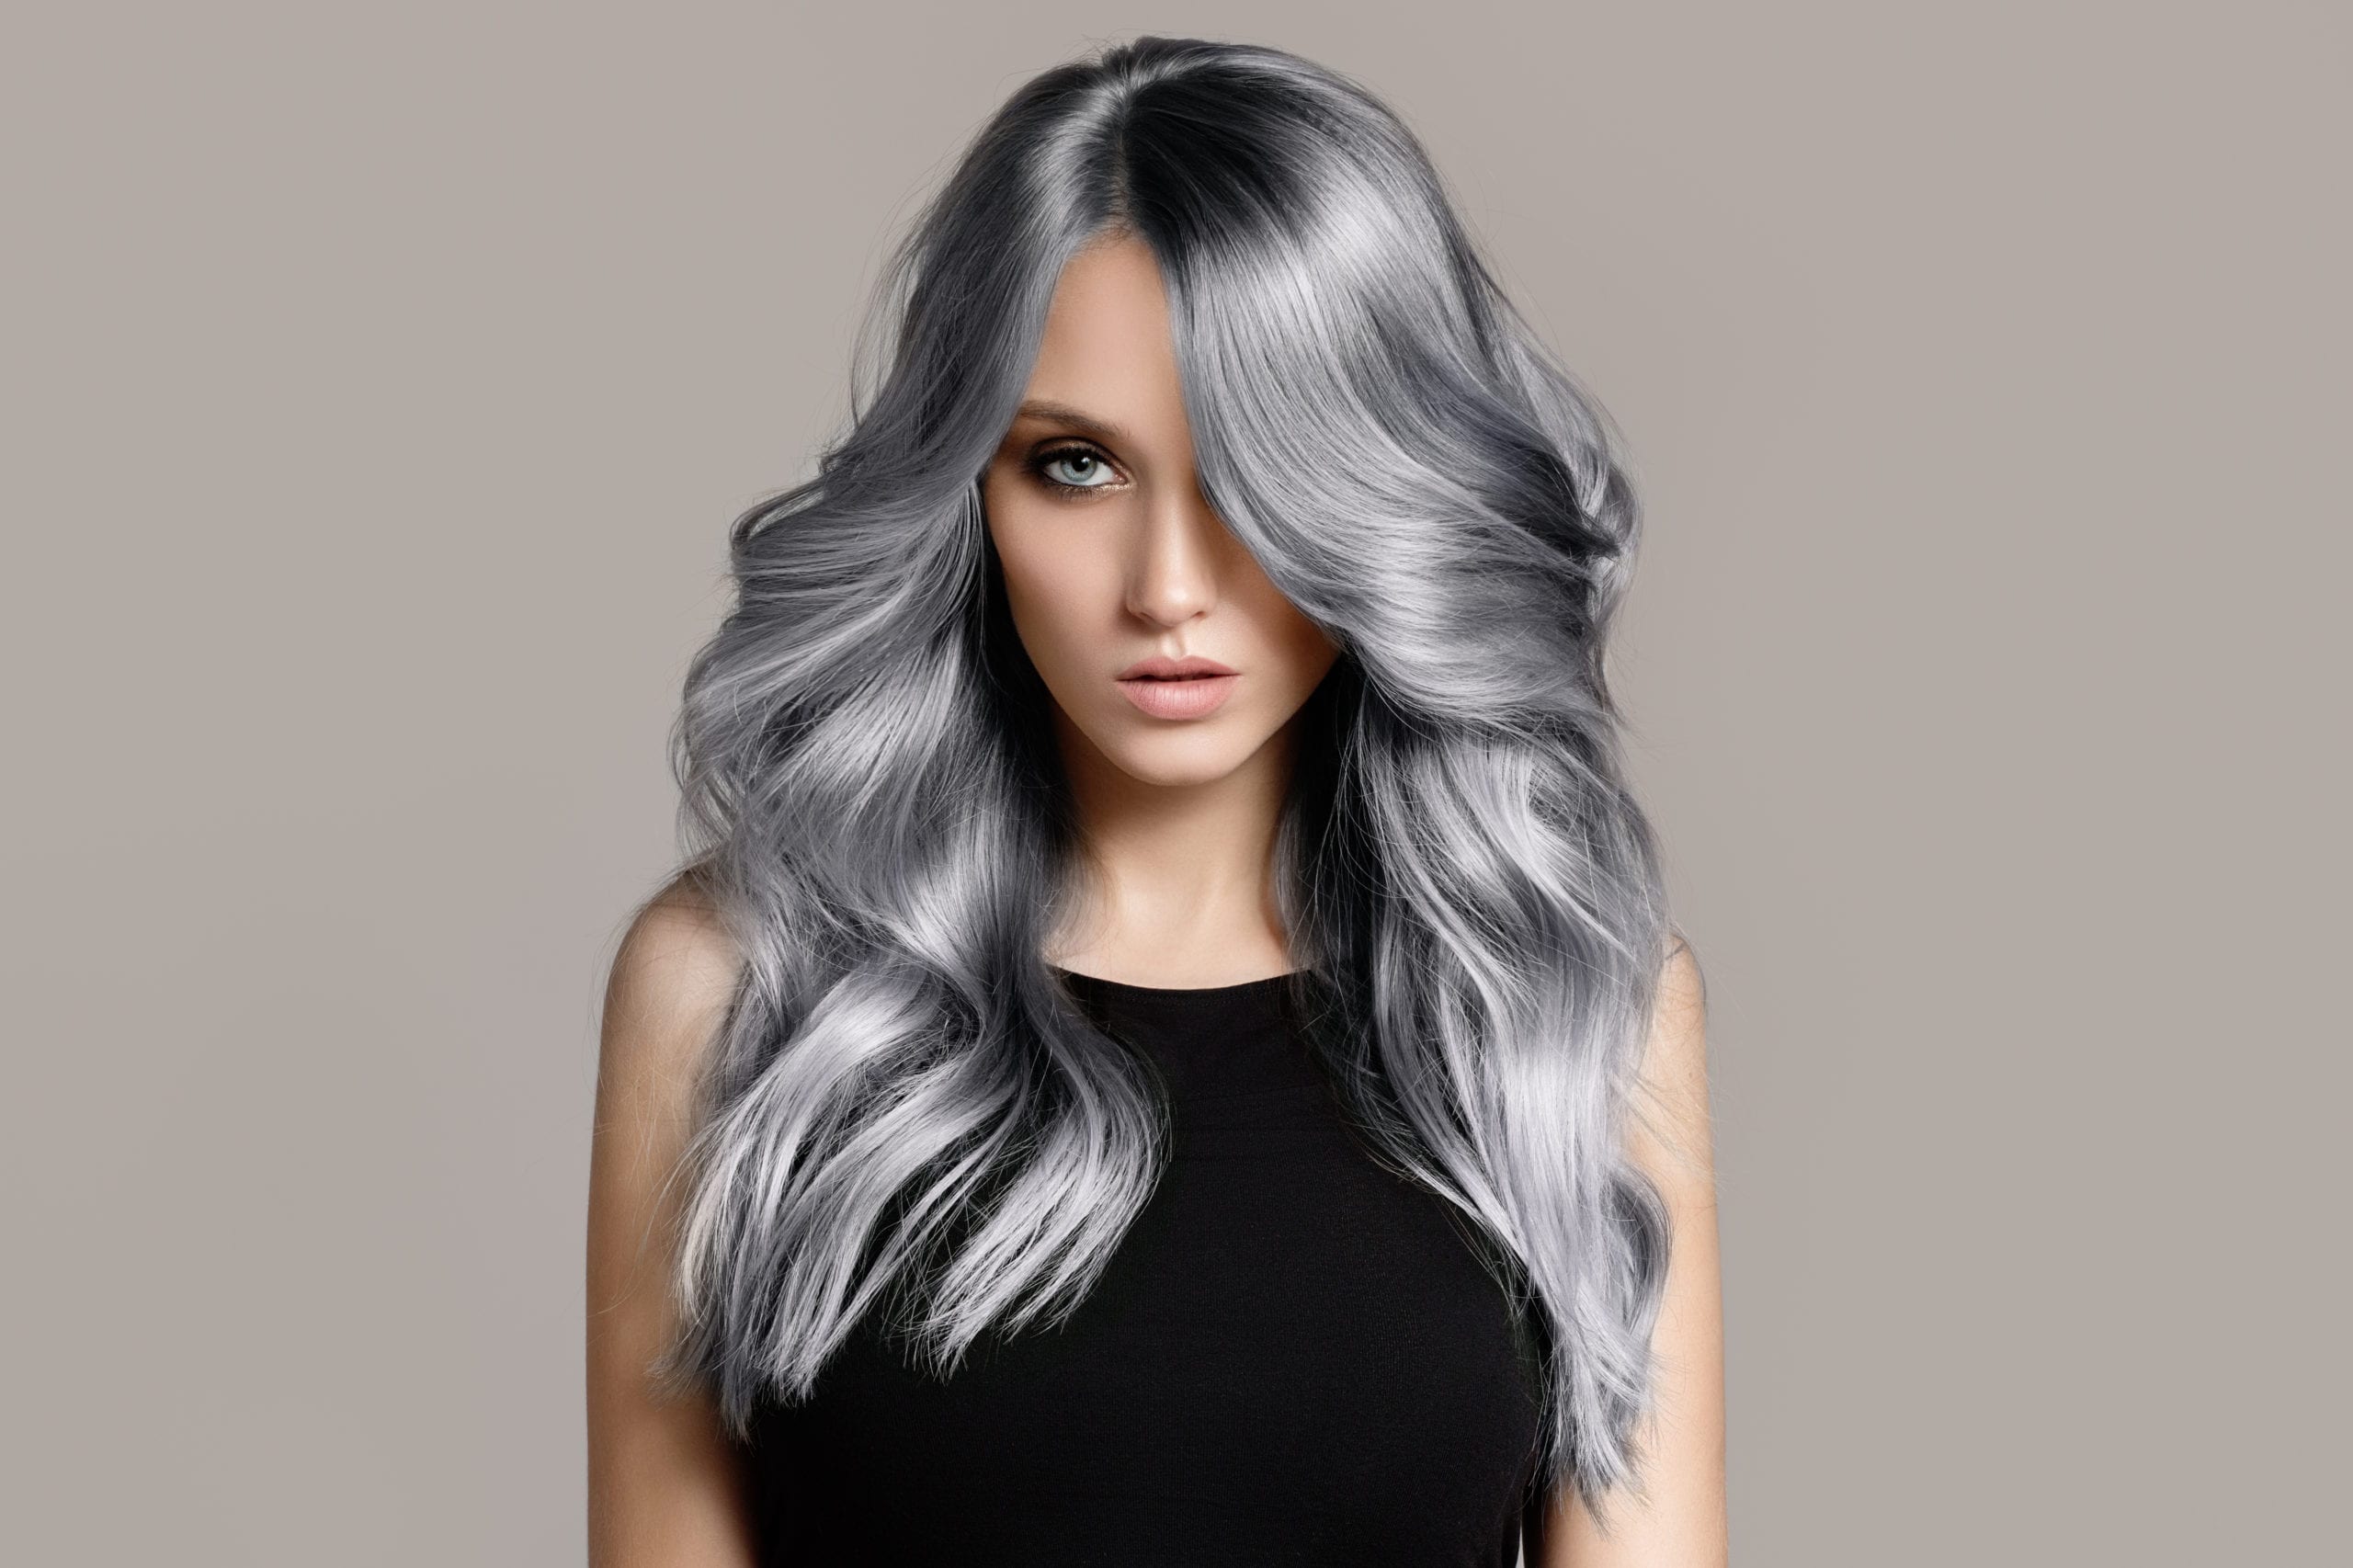 3. How to Dye Your Hair Grey or Silver - wide 5